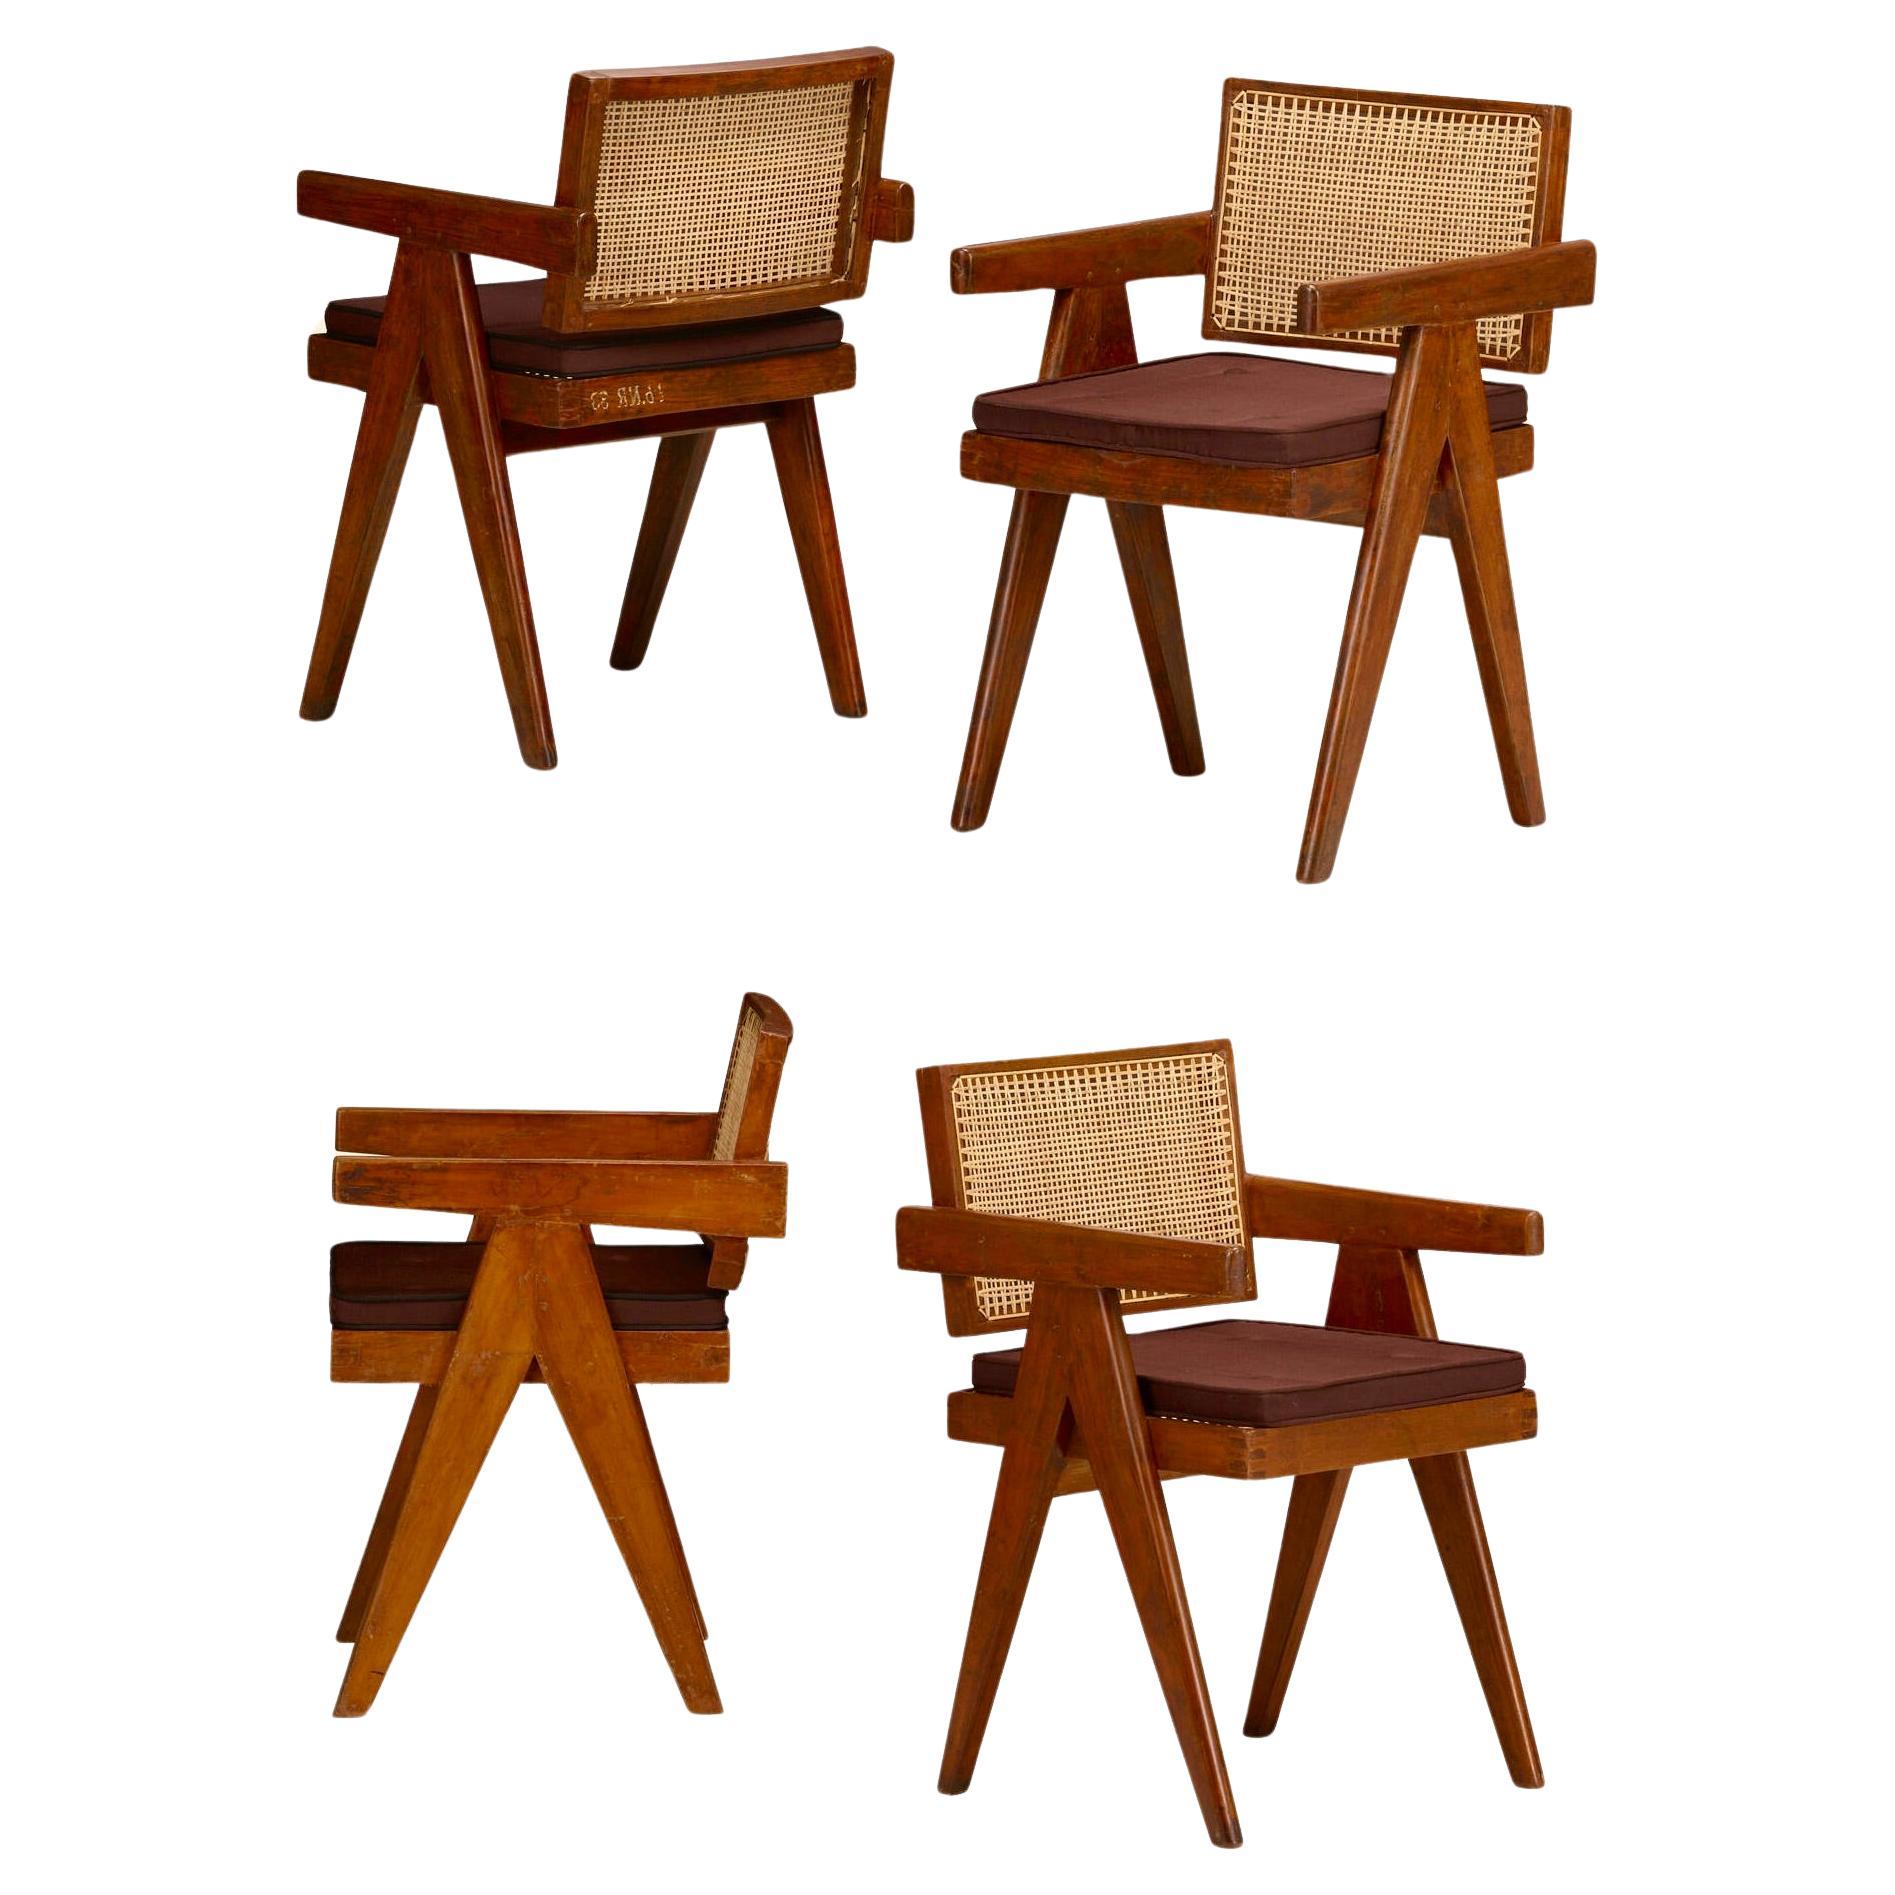 Pierre Jeanneret Set of 8 Office Cane Chairs Ca. 1955-1960 from Chandigarh For Sale 8